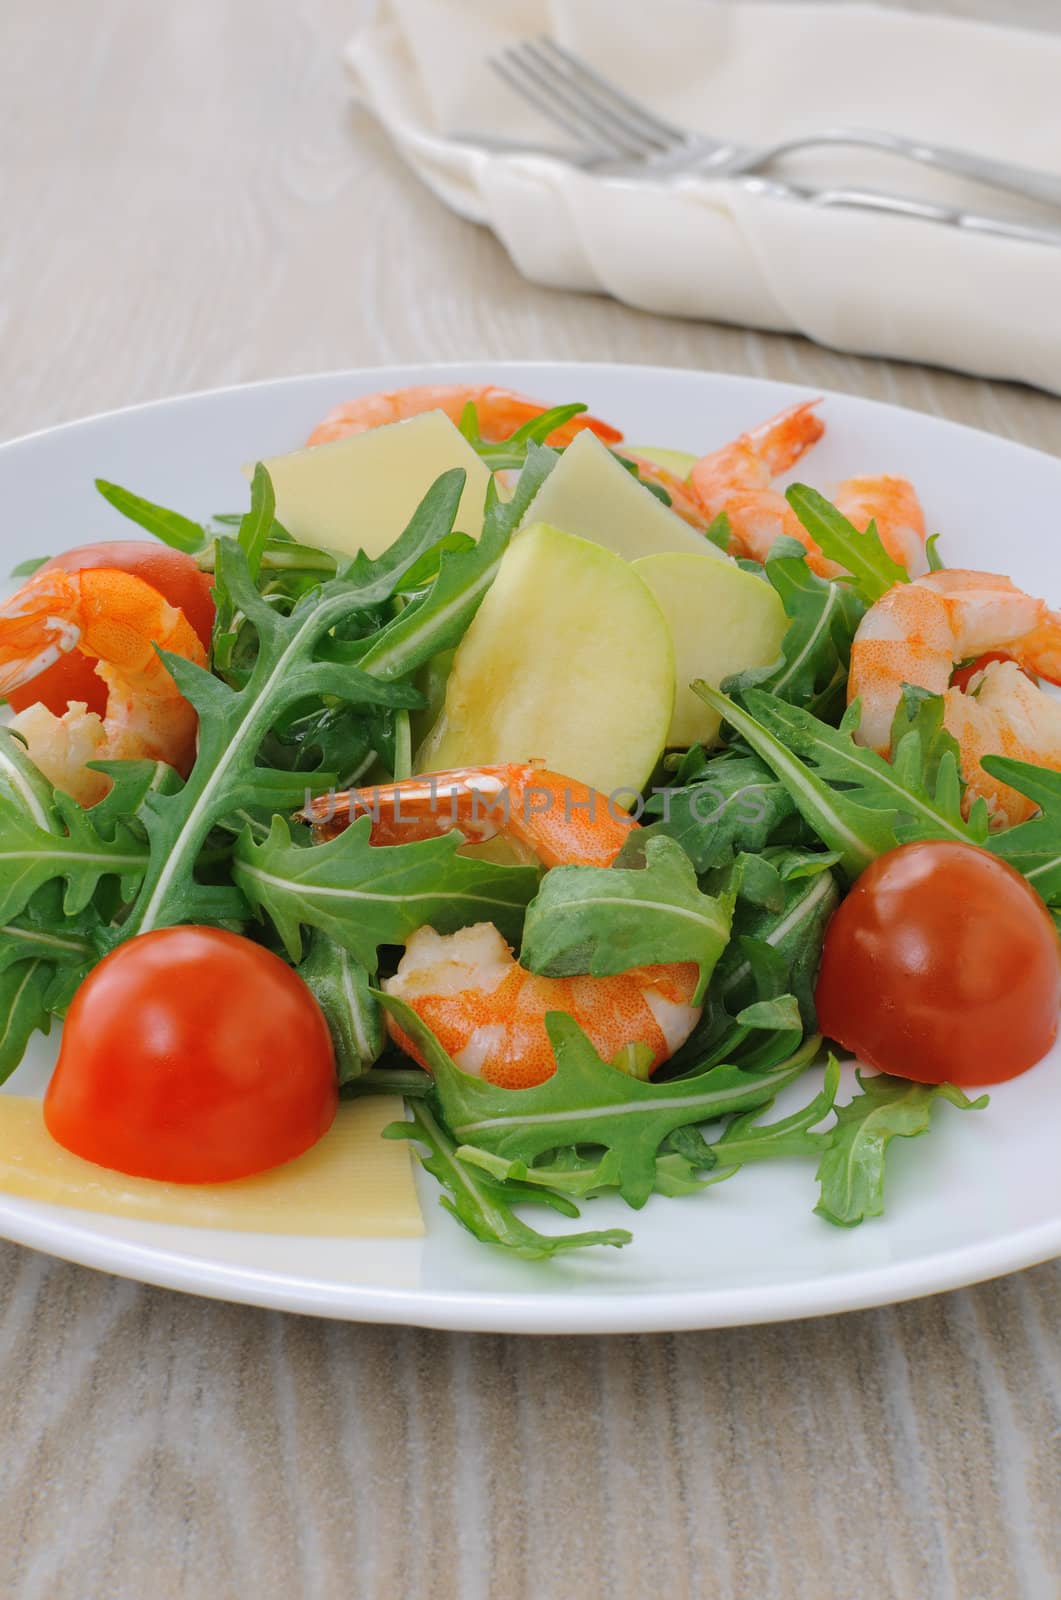 Spicy salad of arugula with cherry tomatoes and shrimp by Apolonia